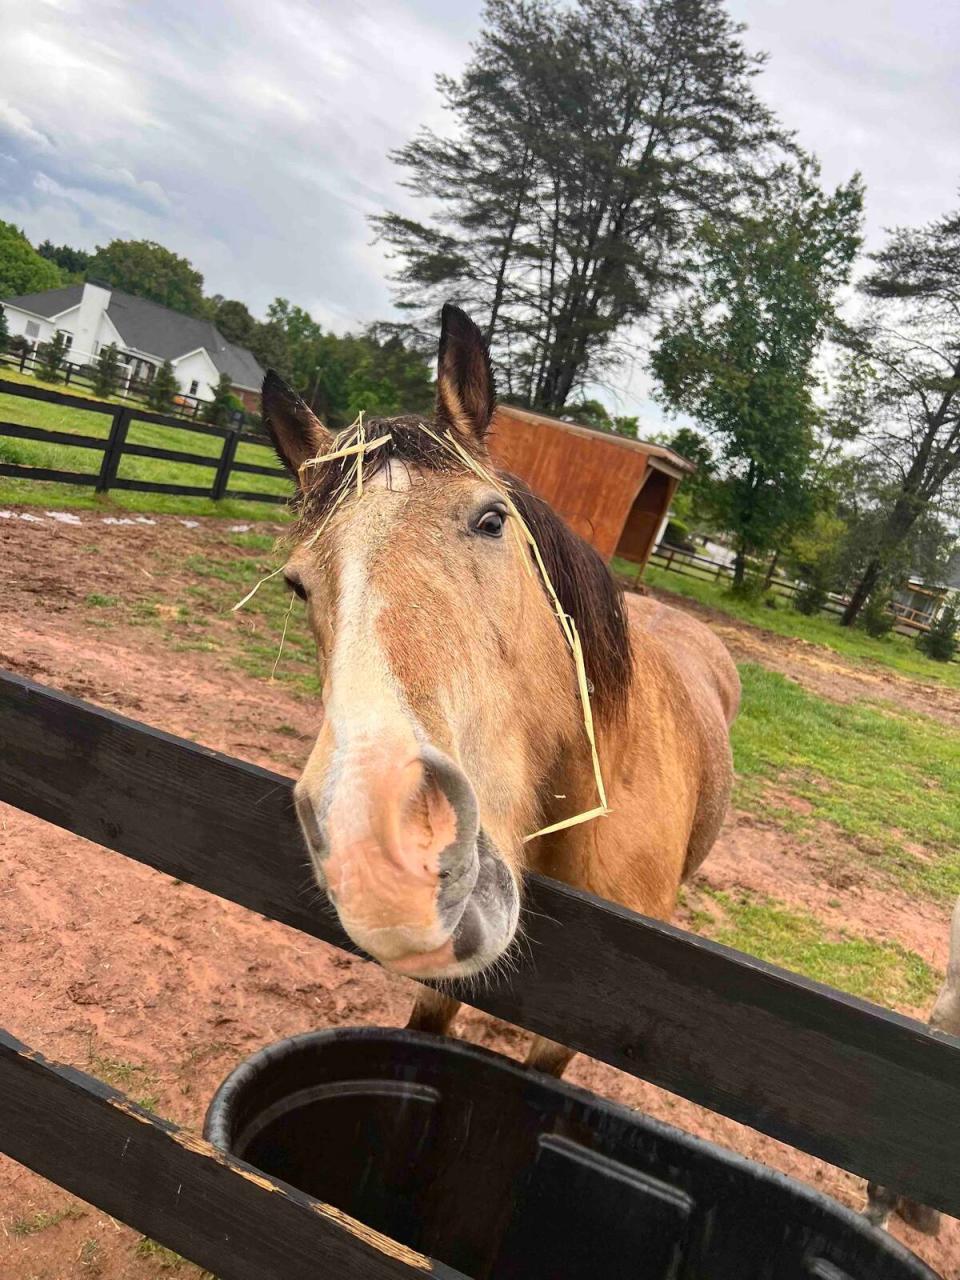 Say "hello" to horses. Listing: Hidden horse farm close to Athens